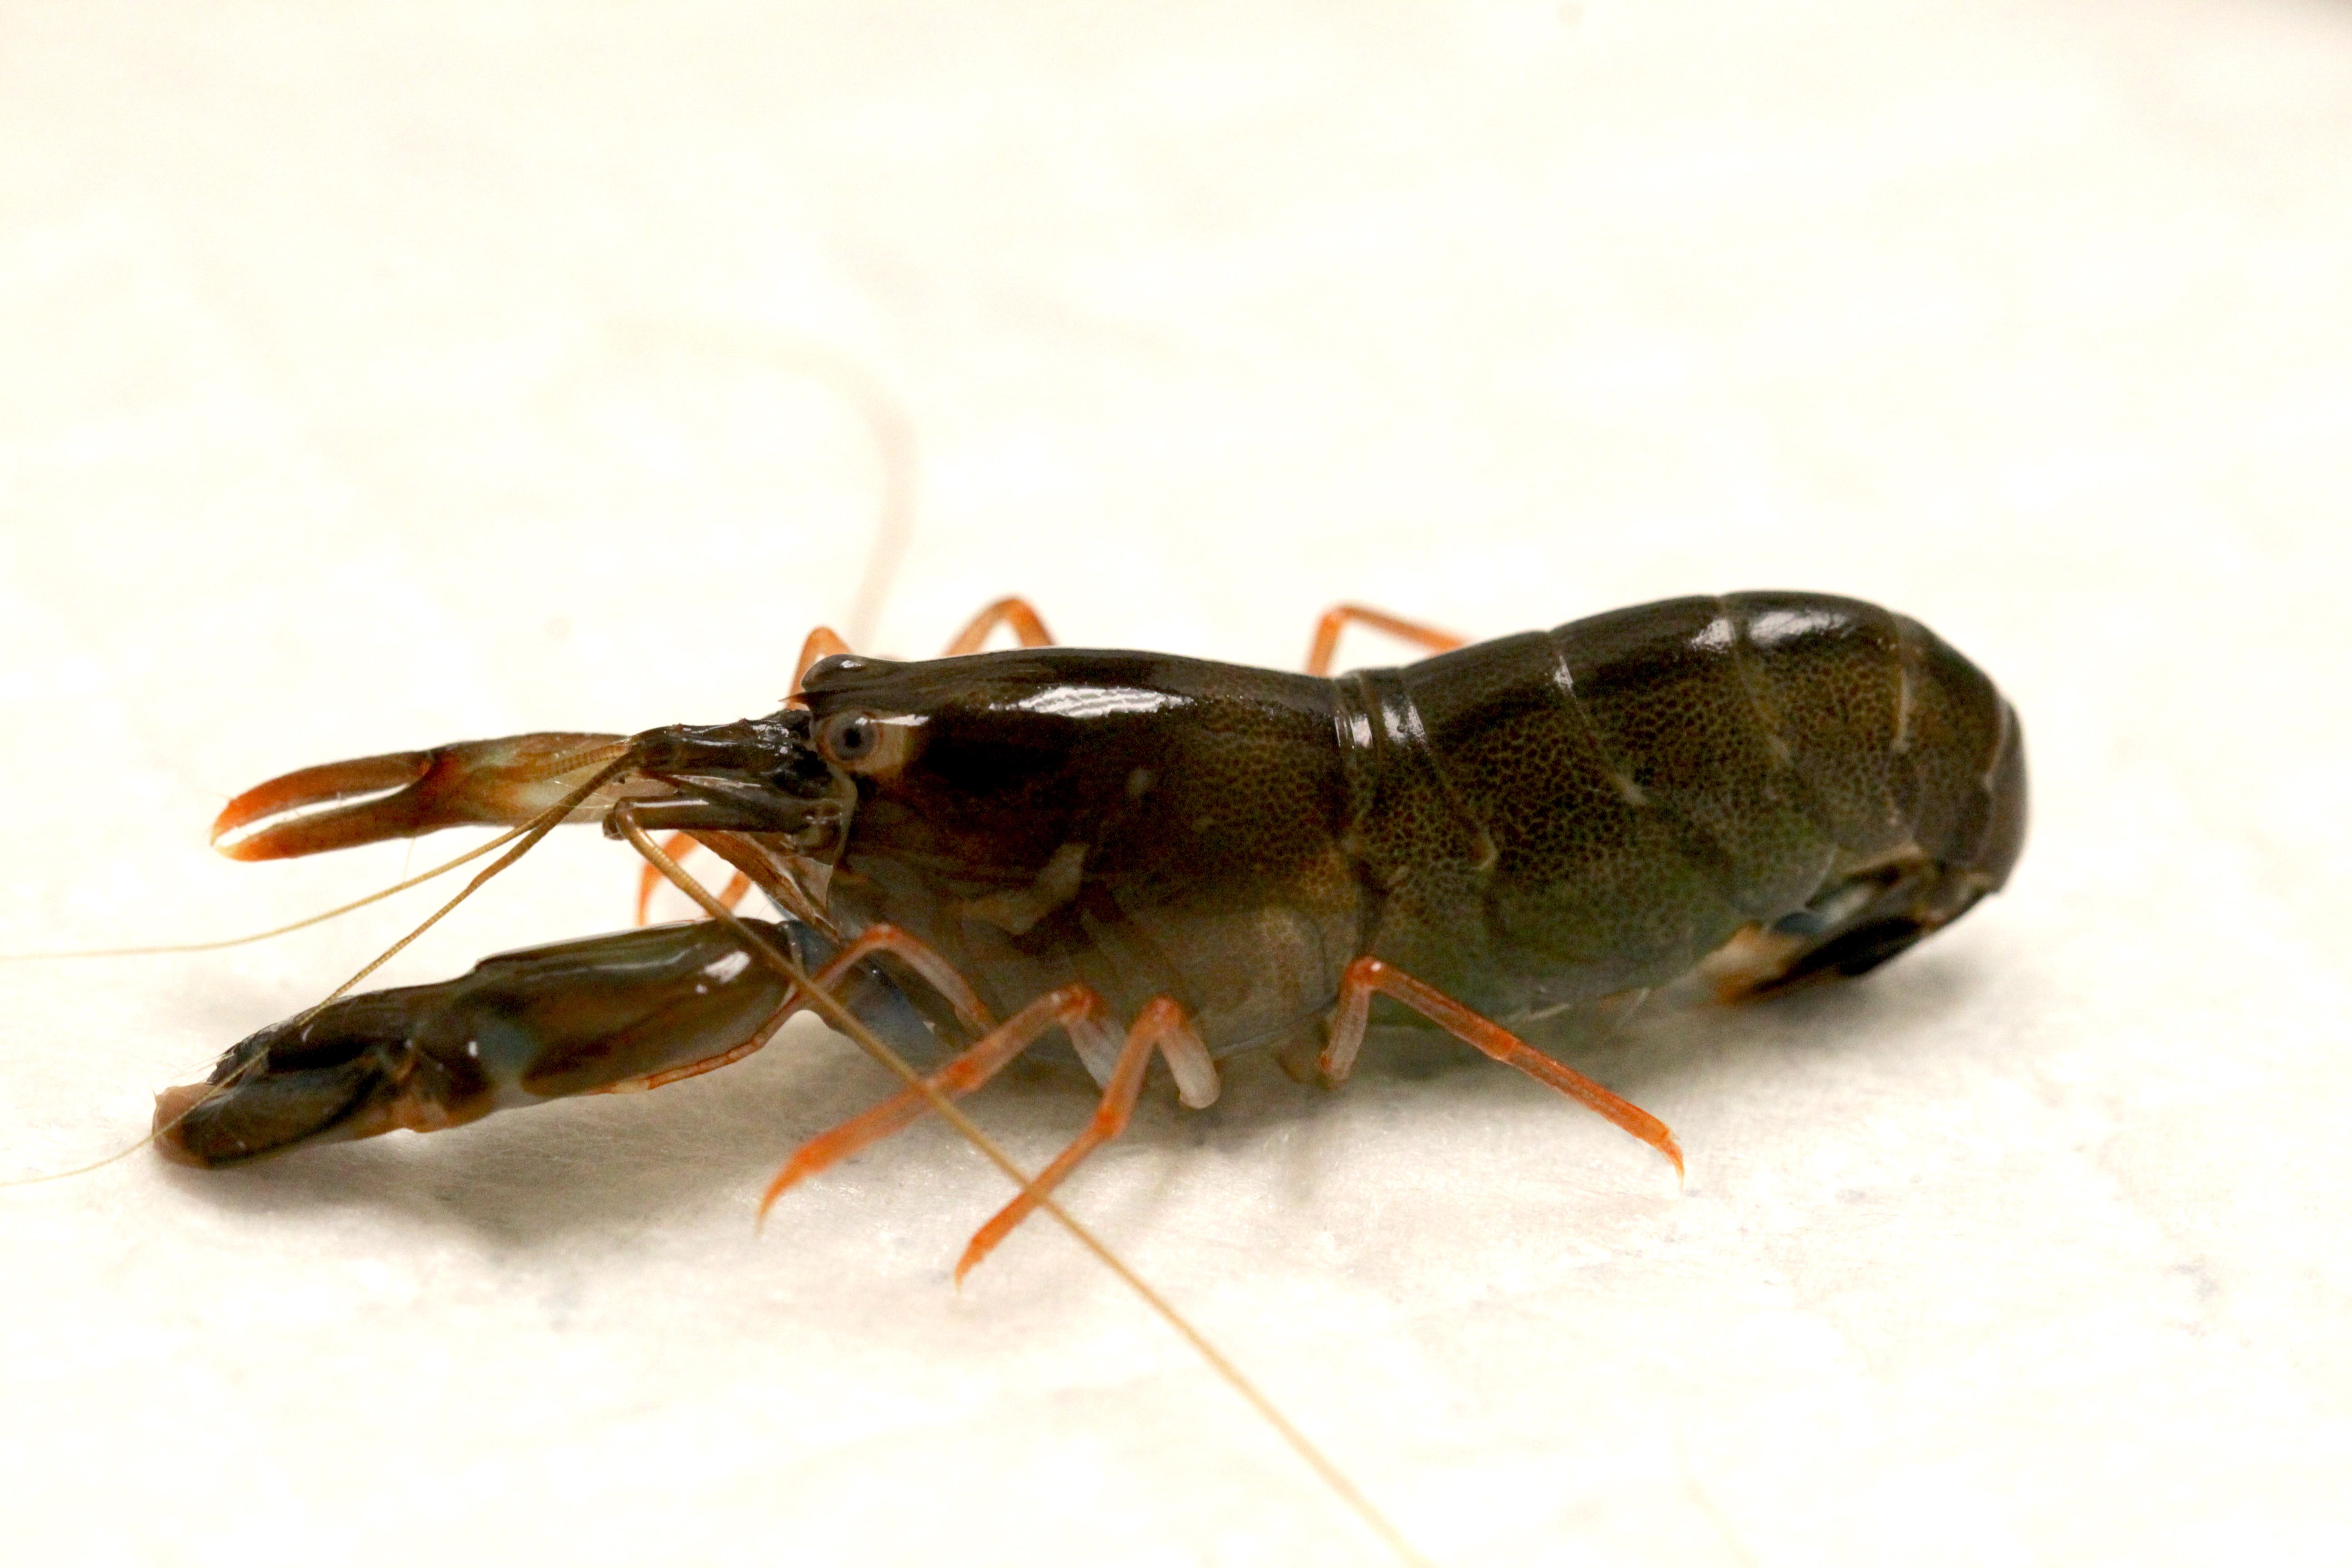 Young snapping shrimps' claws 'accelerate in water like a bullet